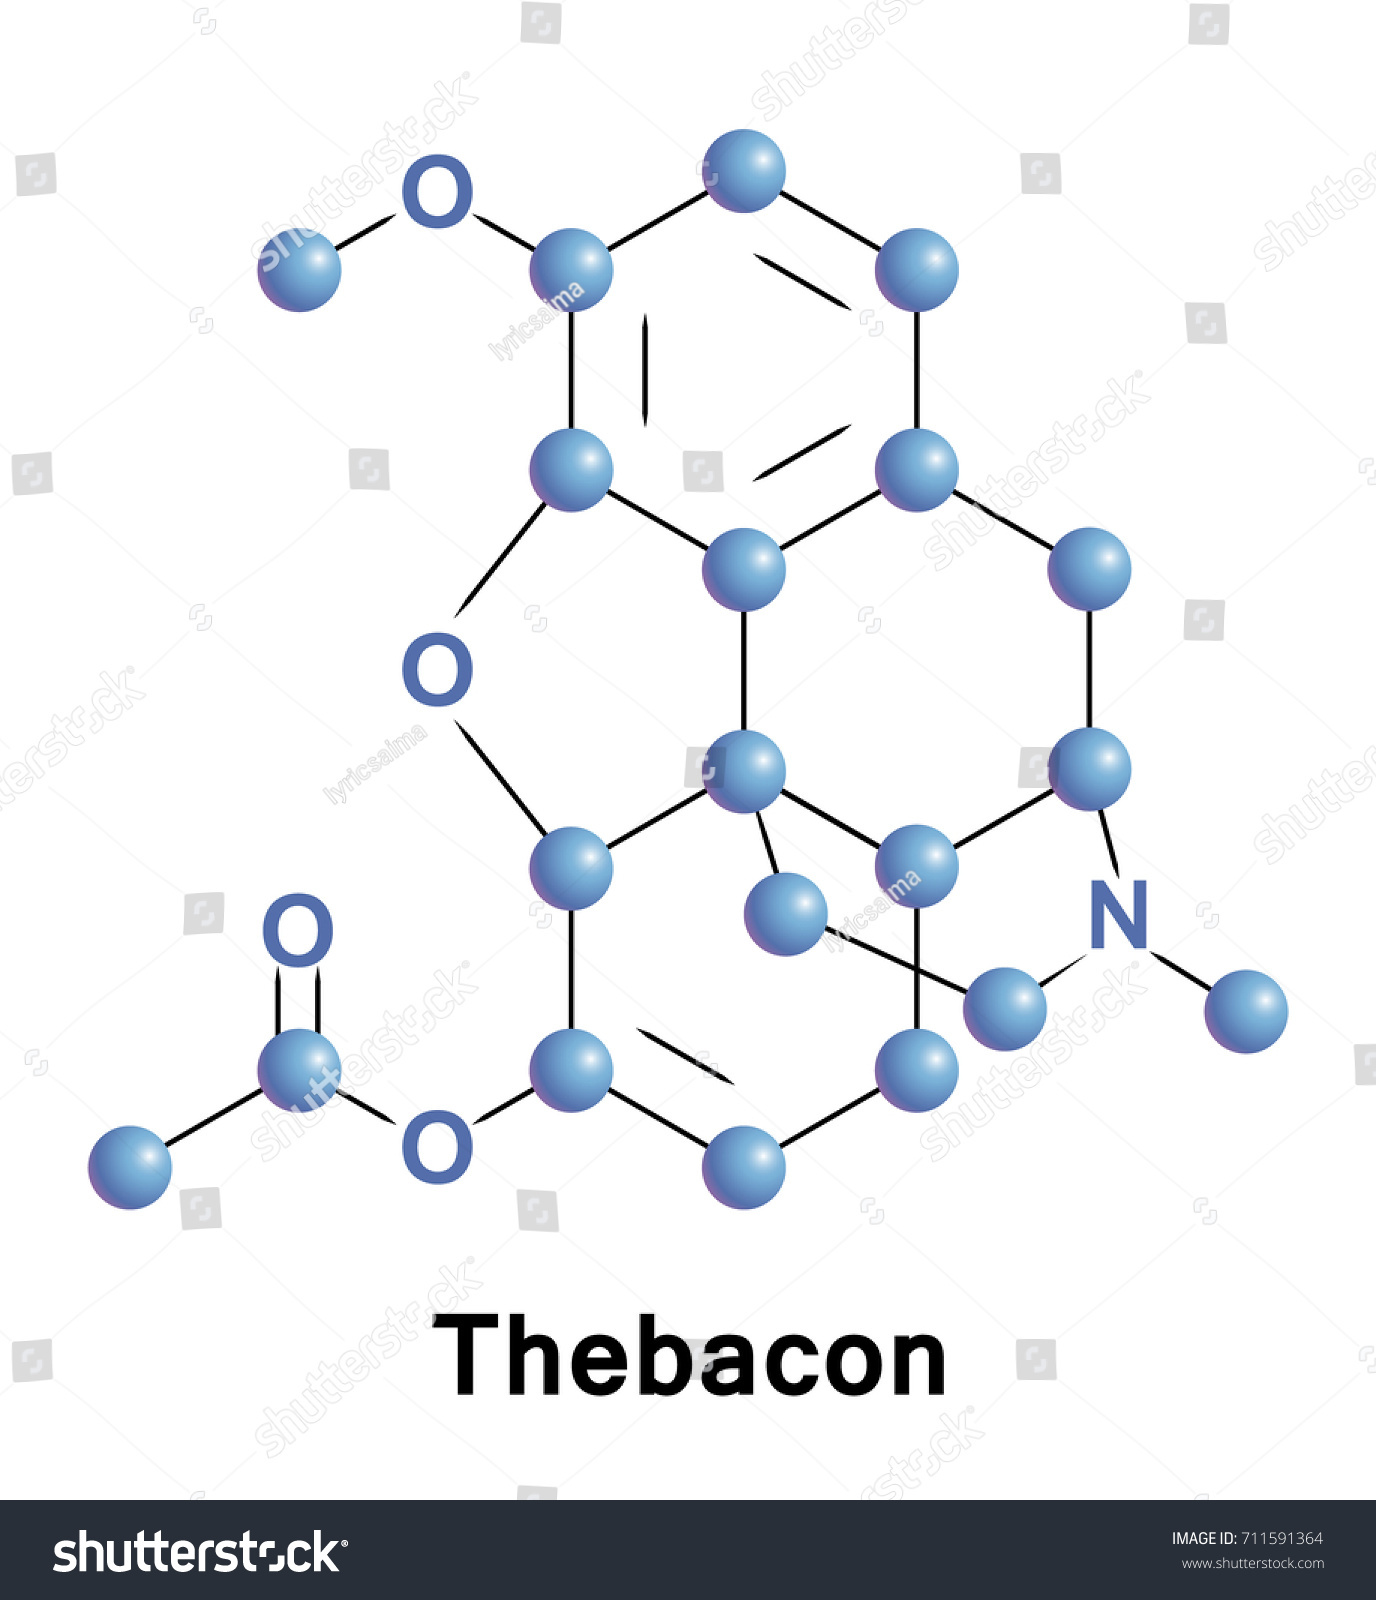 SVG of Thebacon, or dihydrocodeinone enol acetate, is a semisynthetic opioid that is similar to hydrocodone and is most commonly synthesised from thebaine svg